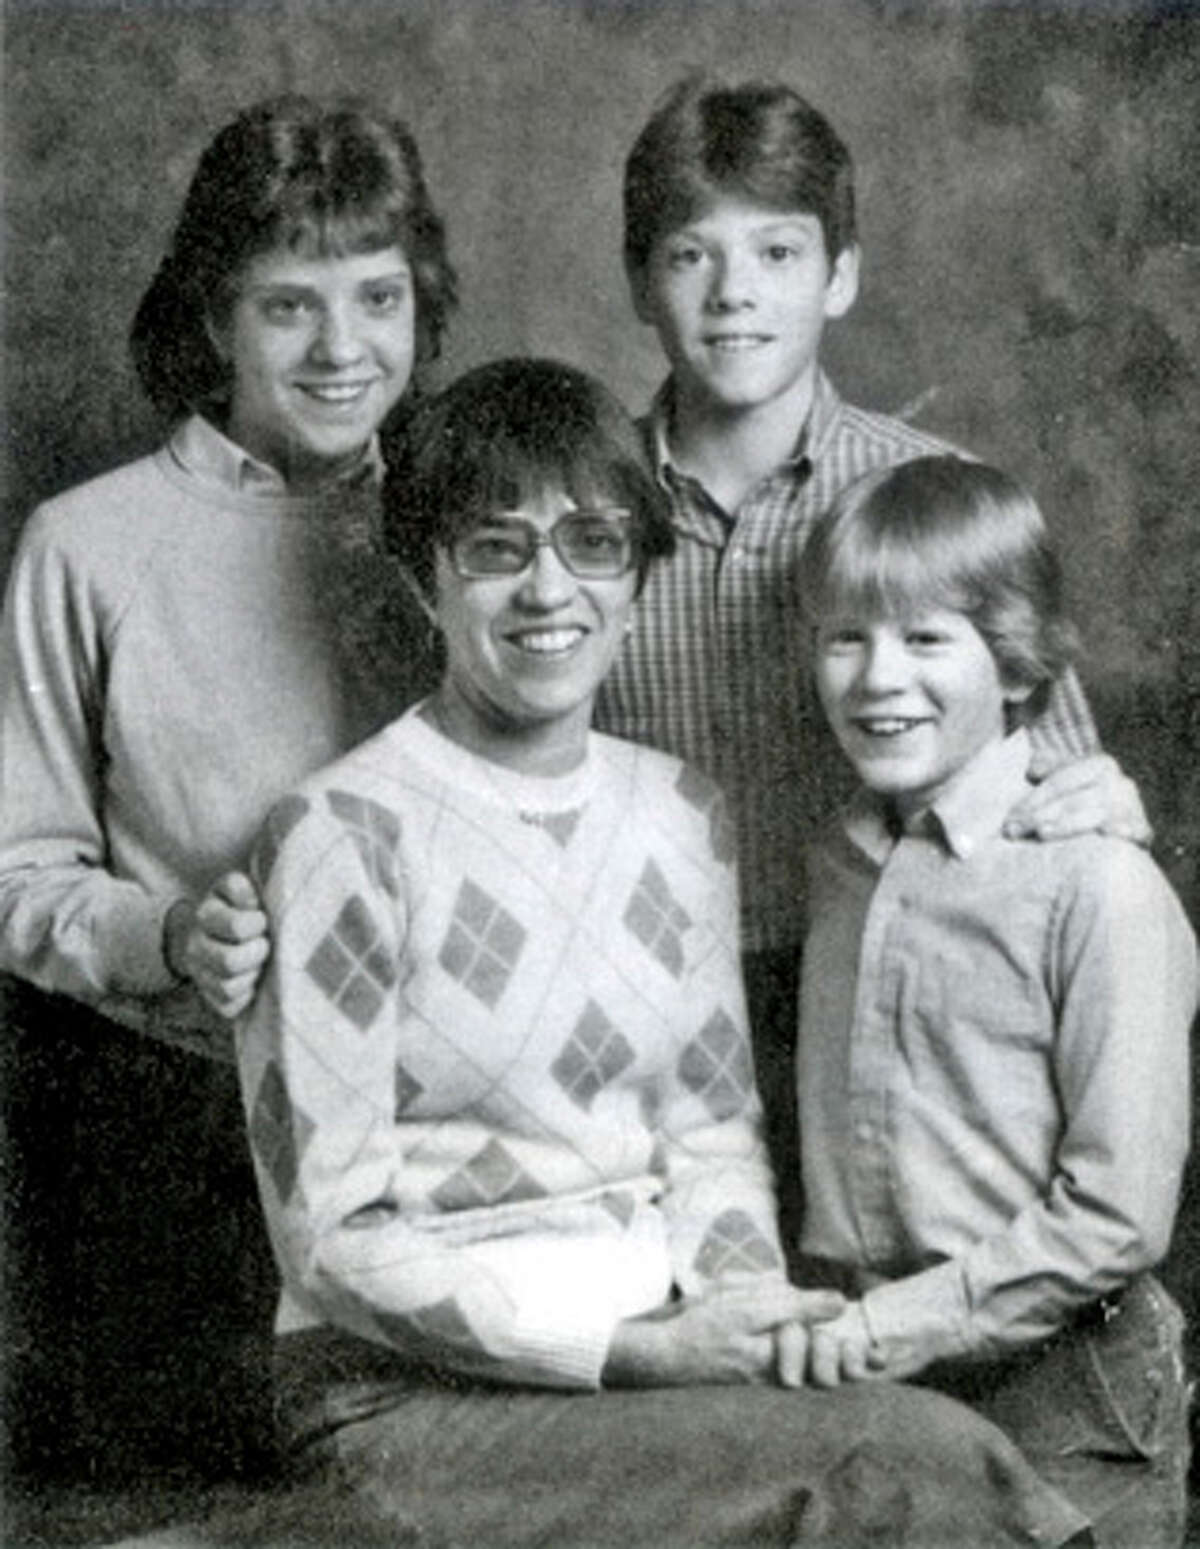 from Anthony Rapp's book "Without You" caption: "Anne, Mom, Adam and me, circa 1983"